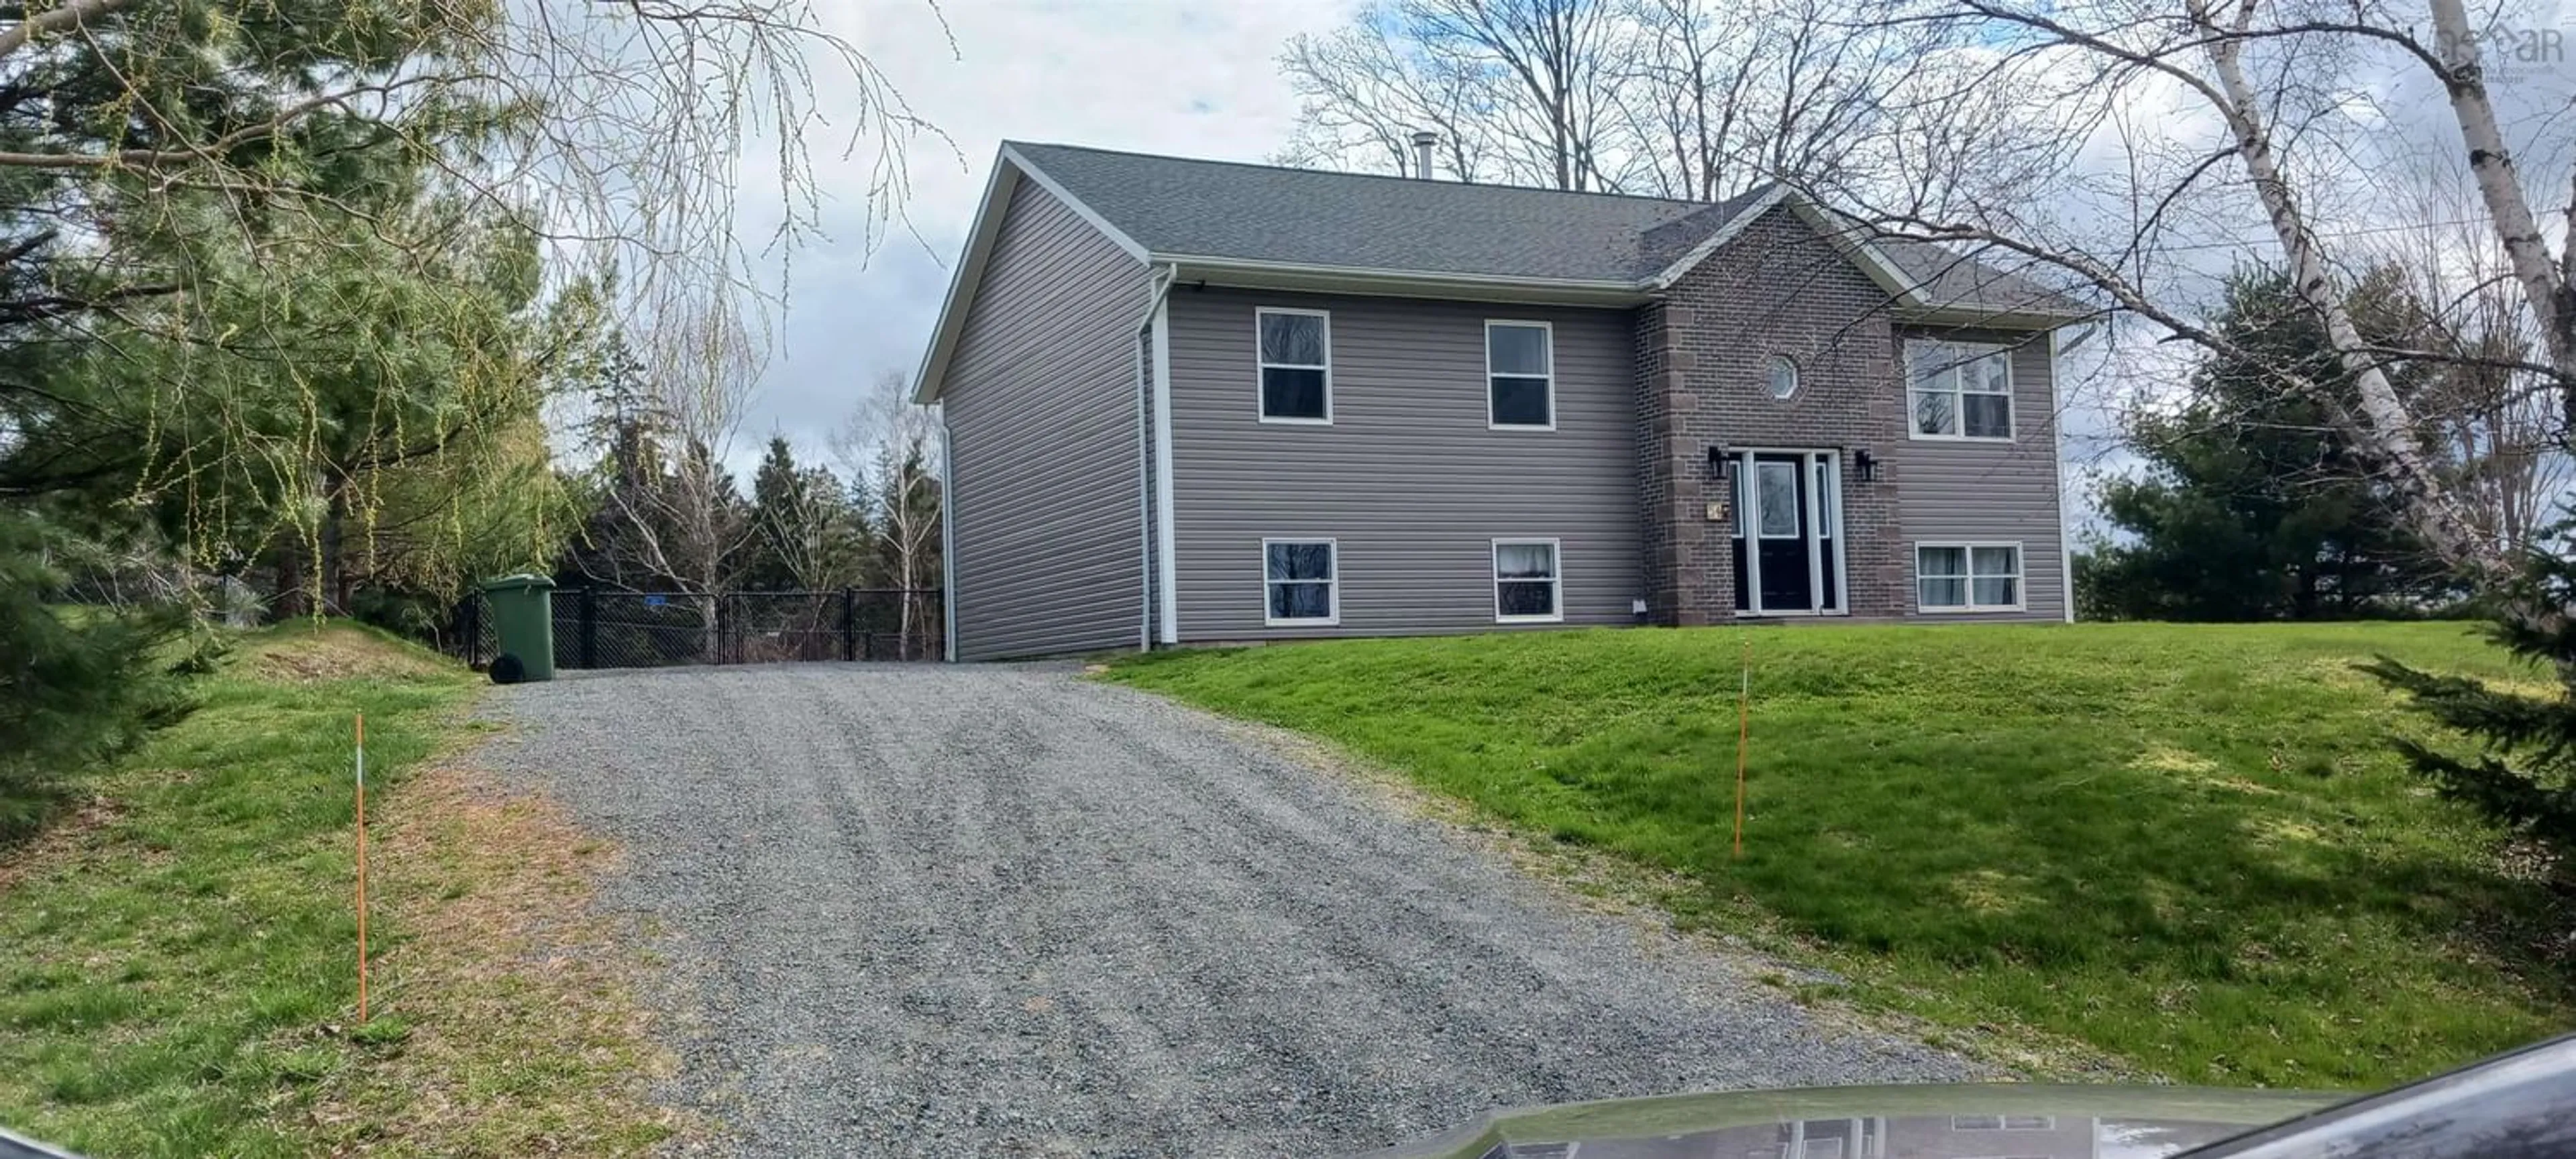 A pic from exterior of the house or condo for 54 Glenabbey Dr, Murray Siding Nova Scotia B6L 3L2